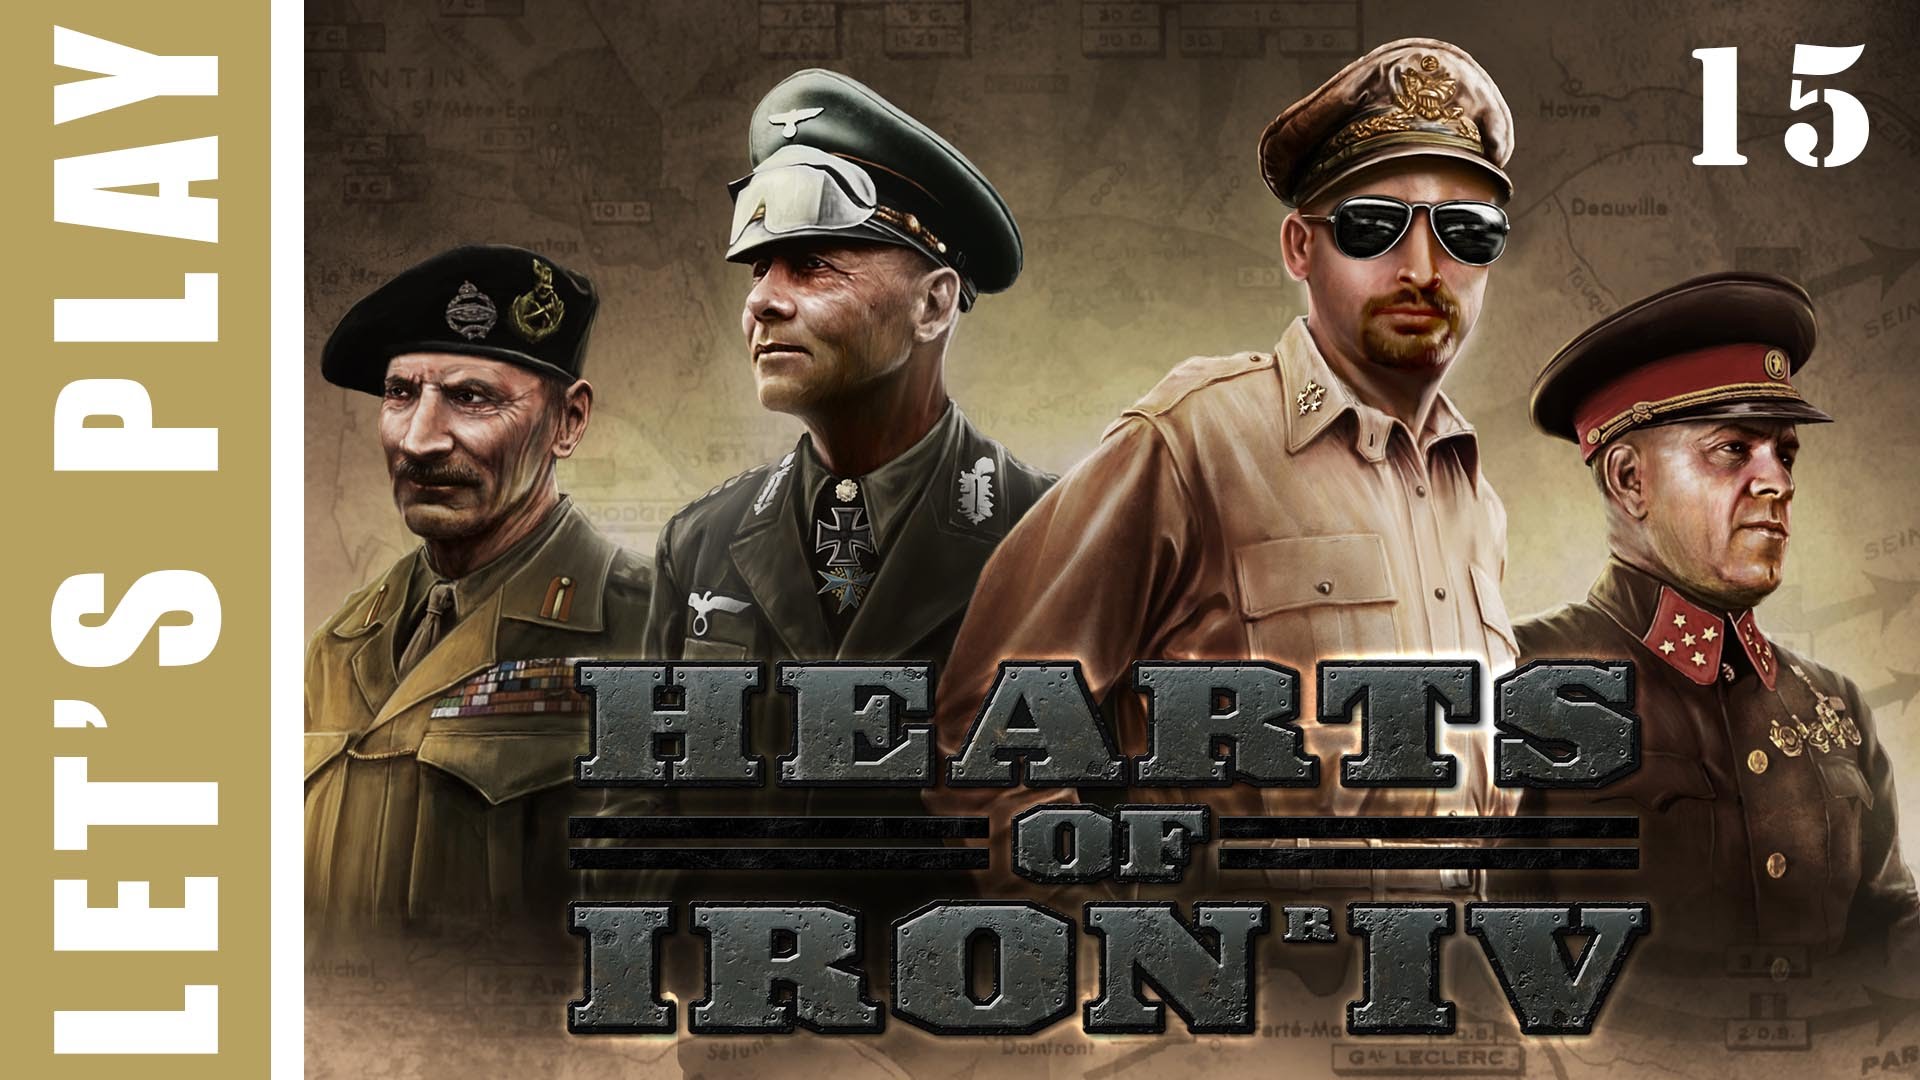 Hearts of Iron IV Germany Wins World War 2 Let’s Play 15